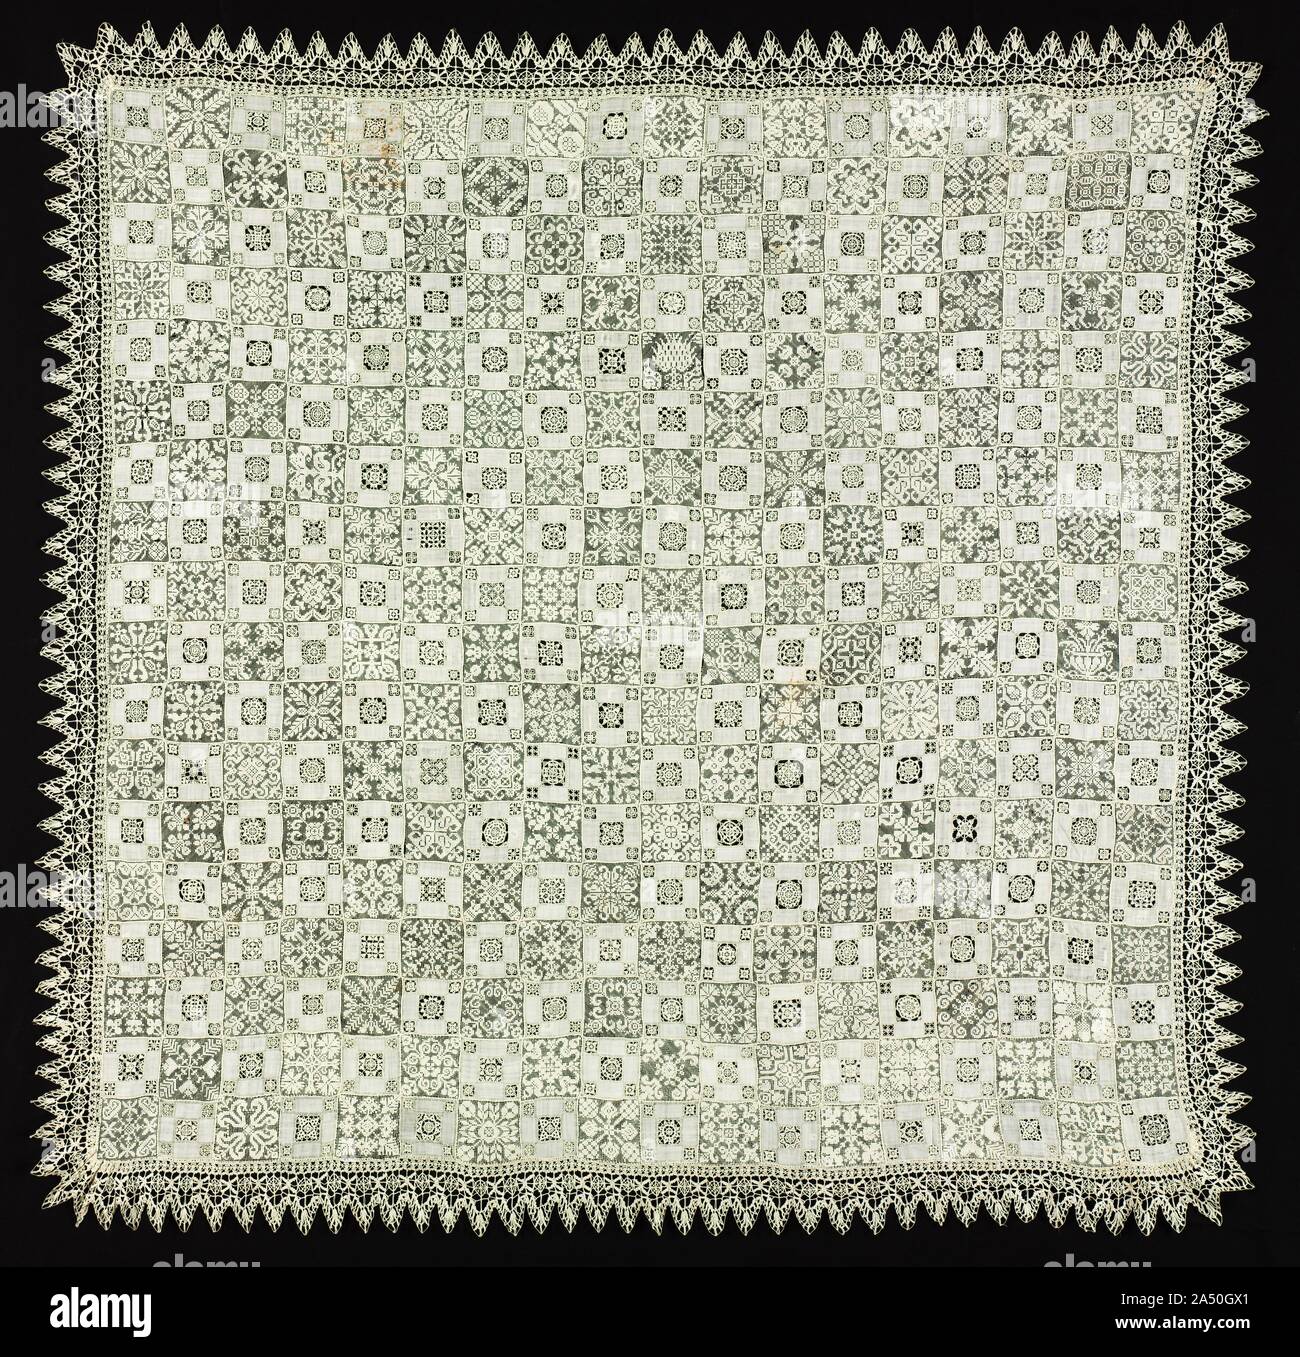 Cloth with Floral and Vegetal Patterns, 1560-1600. The artistic creativity and technical fineness achieved by expert needlewomen are illustrated by this spectacular cover with richly varied needle lace and cutwork decoration with a bobbin lace border. Around 1600, needle and bobbin lace began to serve similar decorative purposes, although they developed from different sources. Needle lace used in cutwork grew out of white embroidery while bobbin lace was closely linked to braiding. Stock Photo